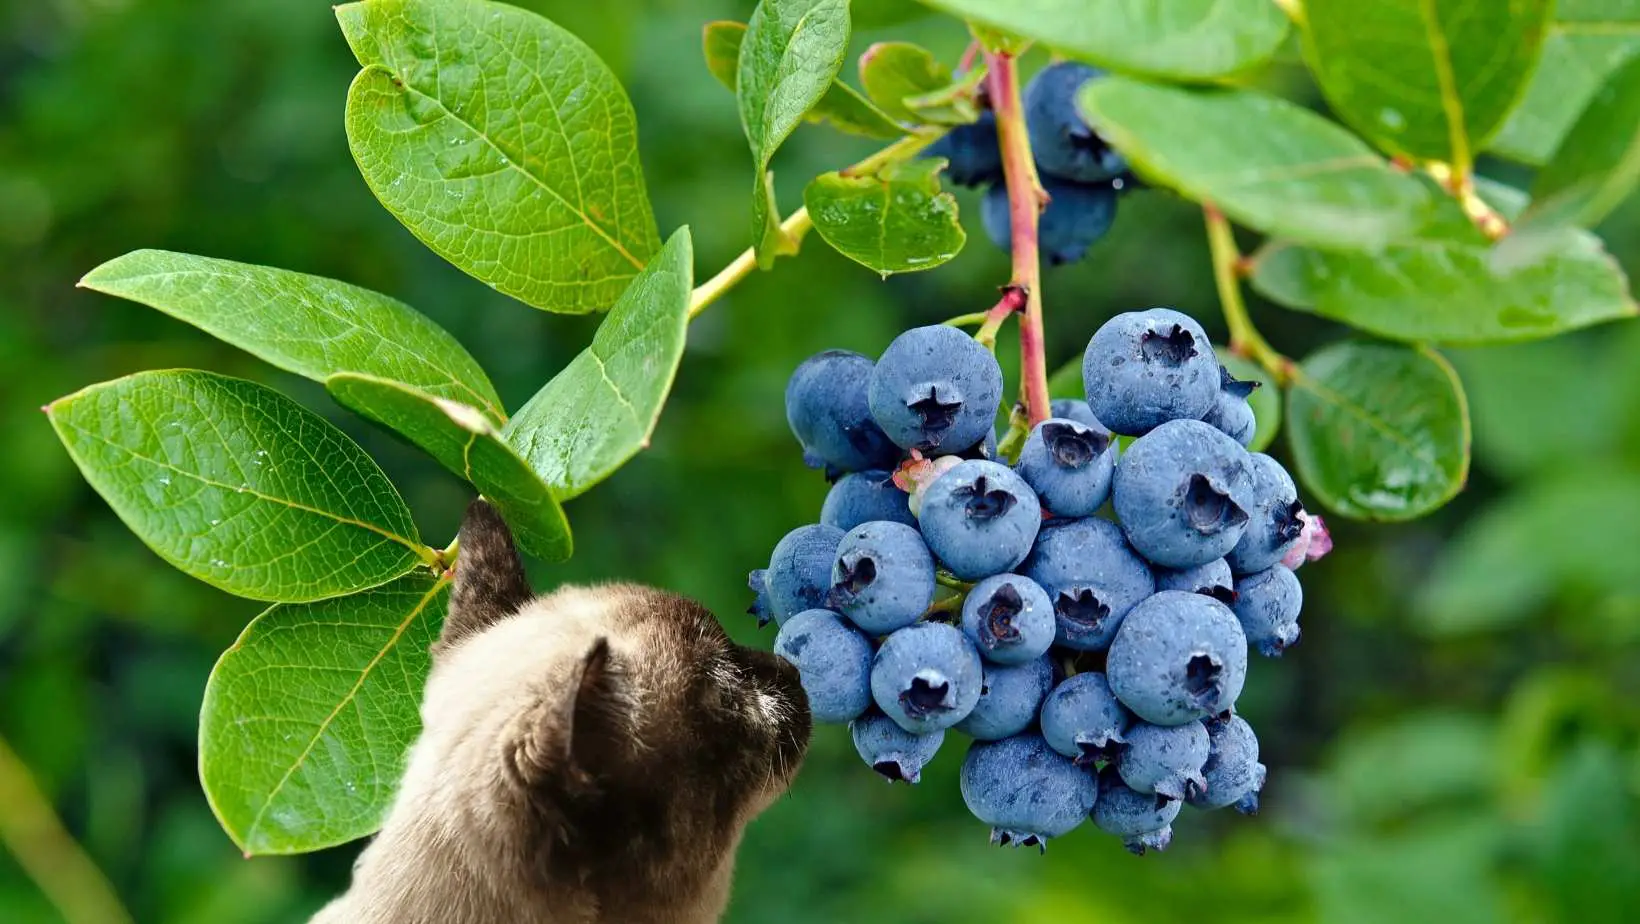 Can Cats Eat Blueberries?